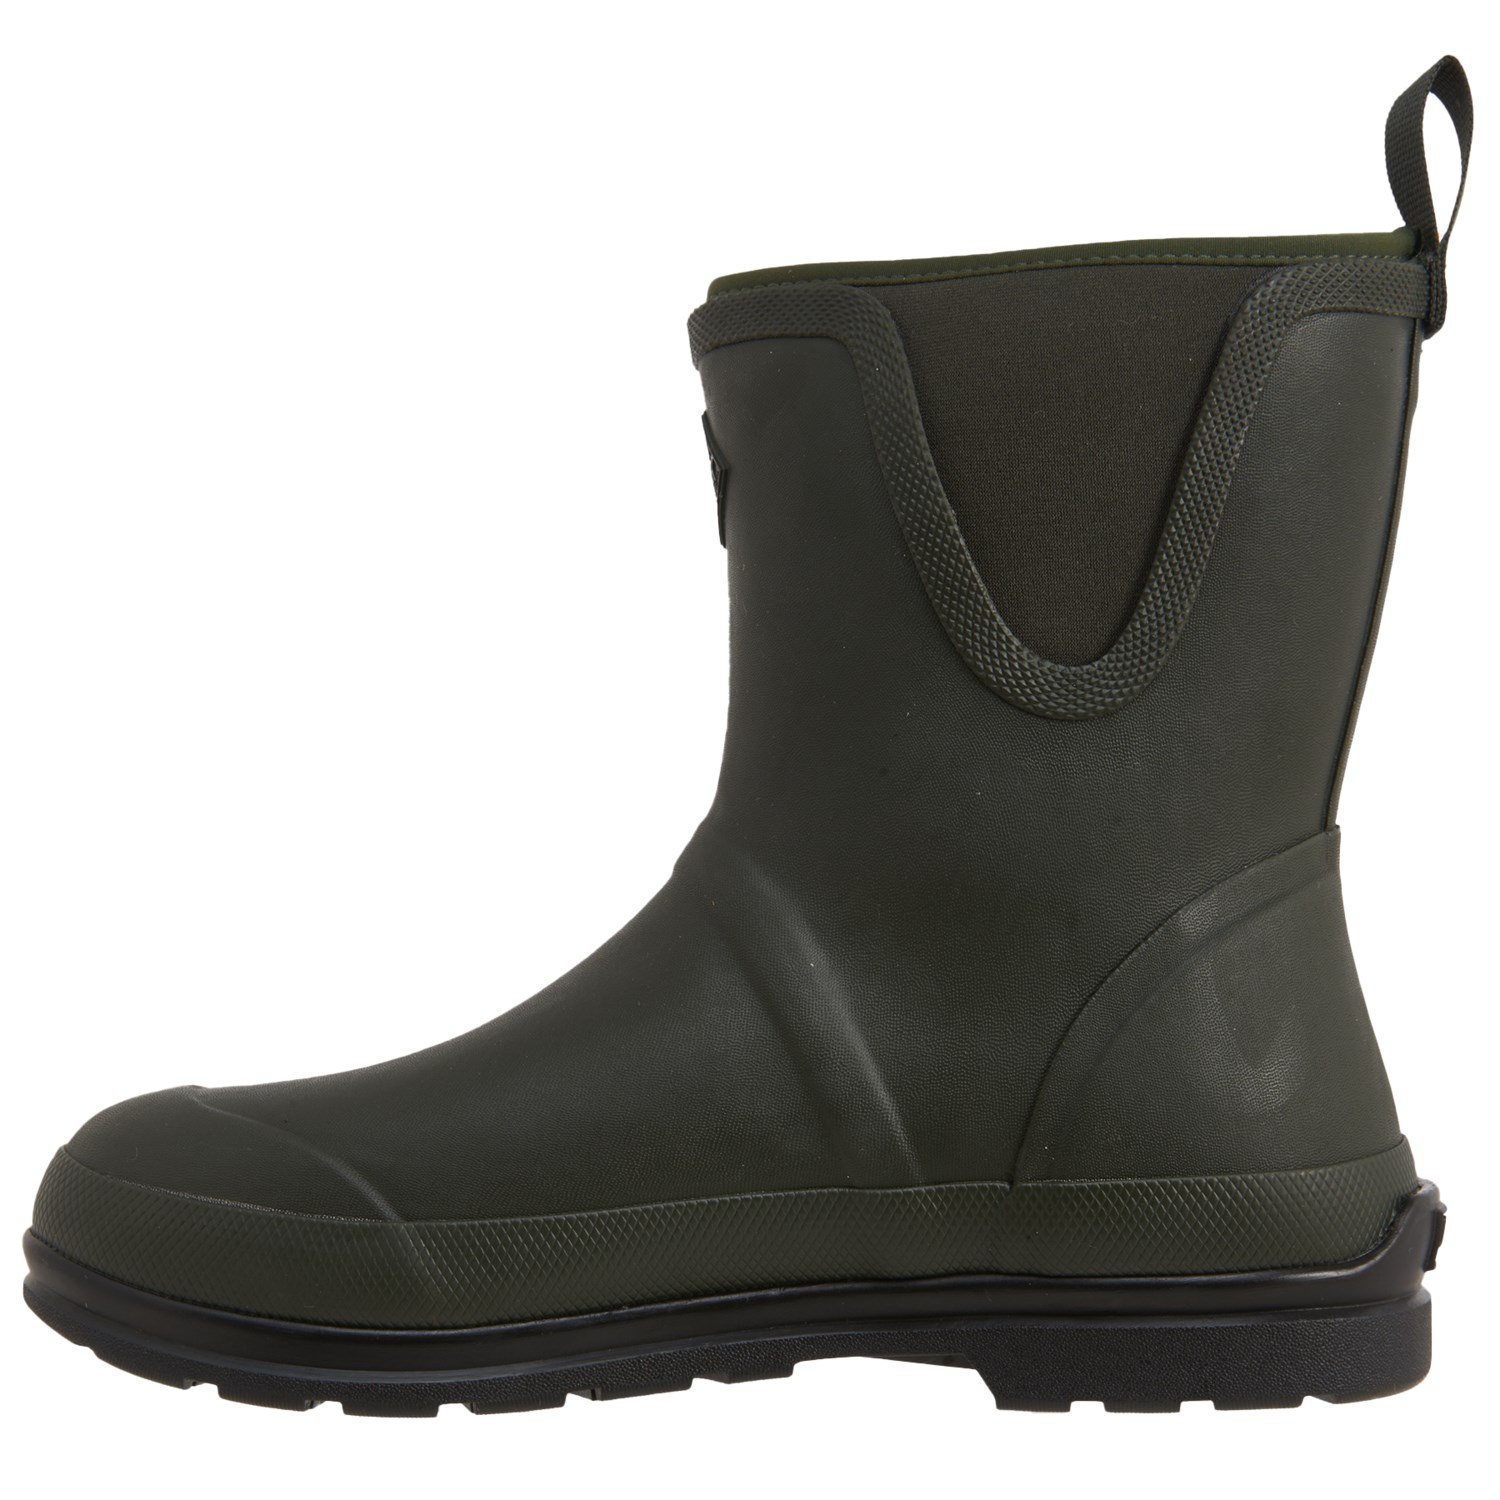 Muck Boot Company Muck Original Mid Boots (For Men) - Save 61%